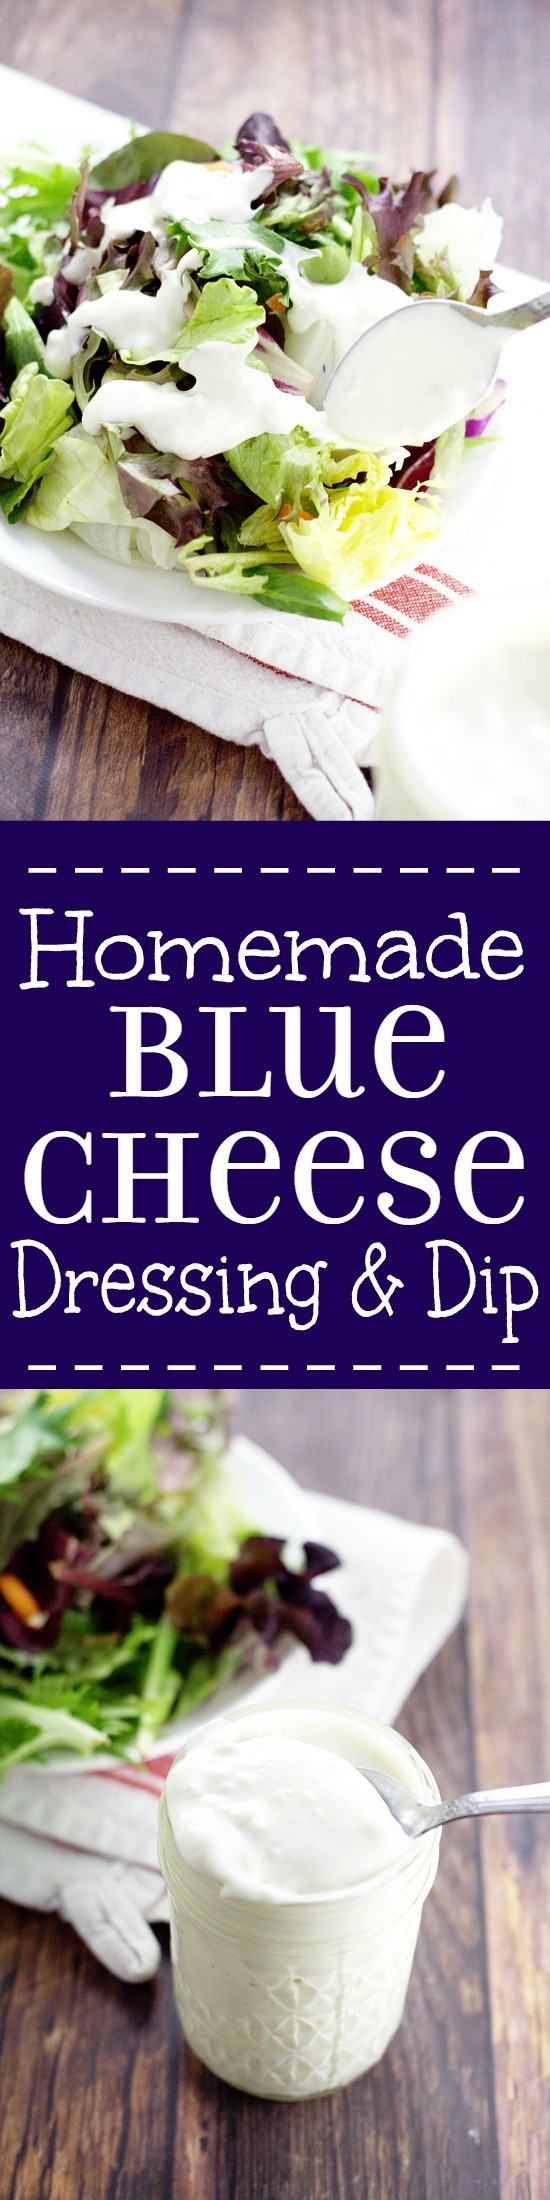 Homemade Buttermilk Blue Cheese Dressing and Dip. This creamy, rich Homemade Buttermilk Blue Cheese Dressing recipe is the perfect dip for hot wings or dressing for your favorite salad. Definitely trying this!